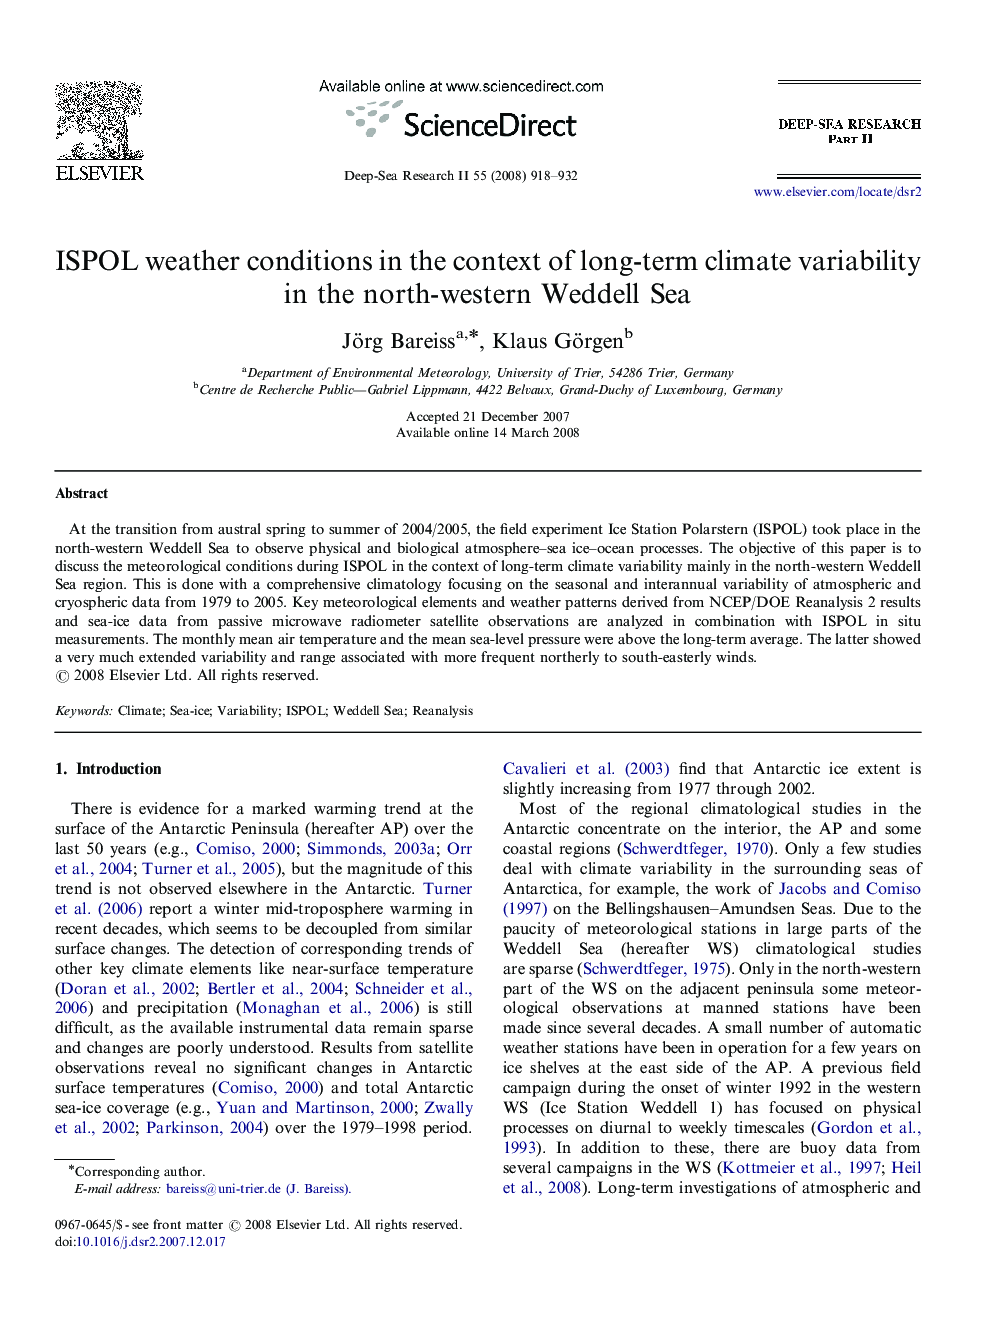 ISPOL weather conditions in the context of long-term climate variability in the north-western Weddell Sea